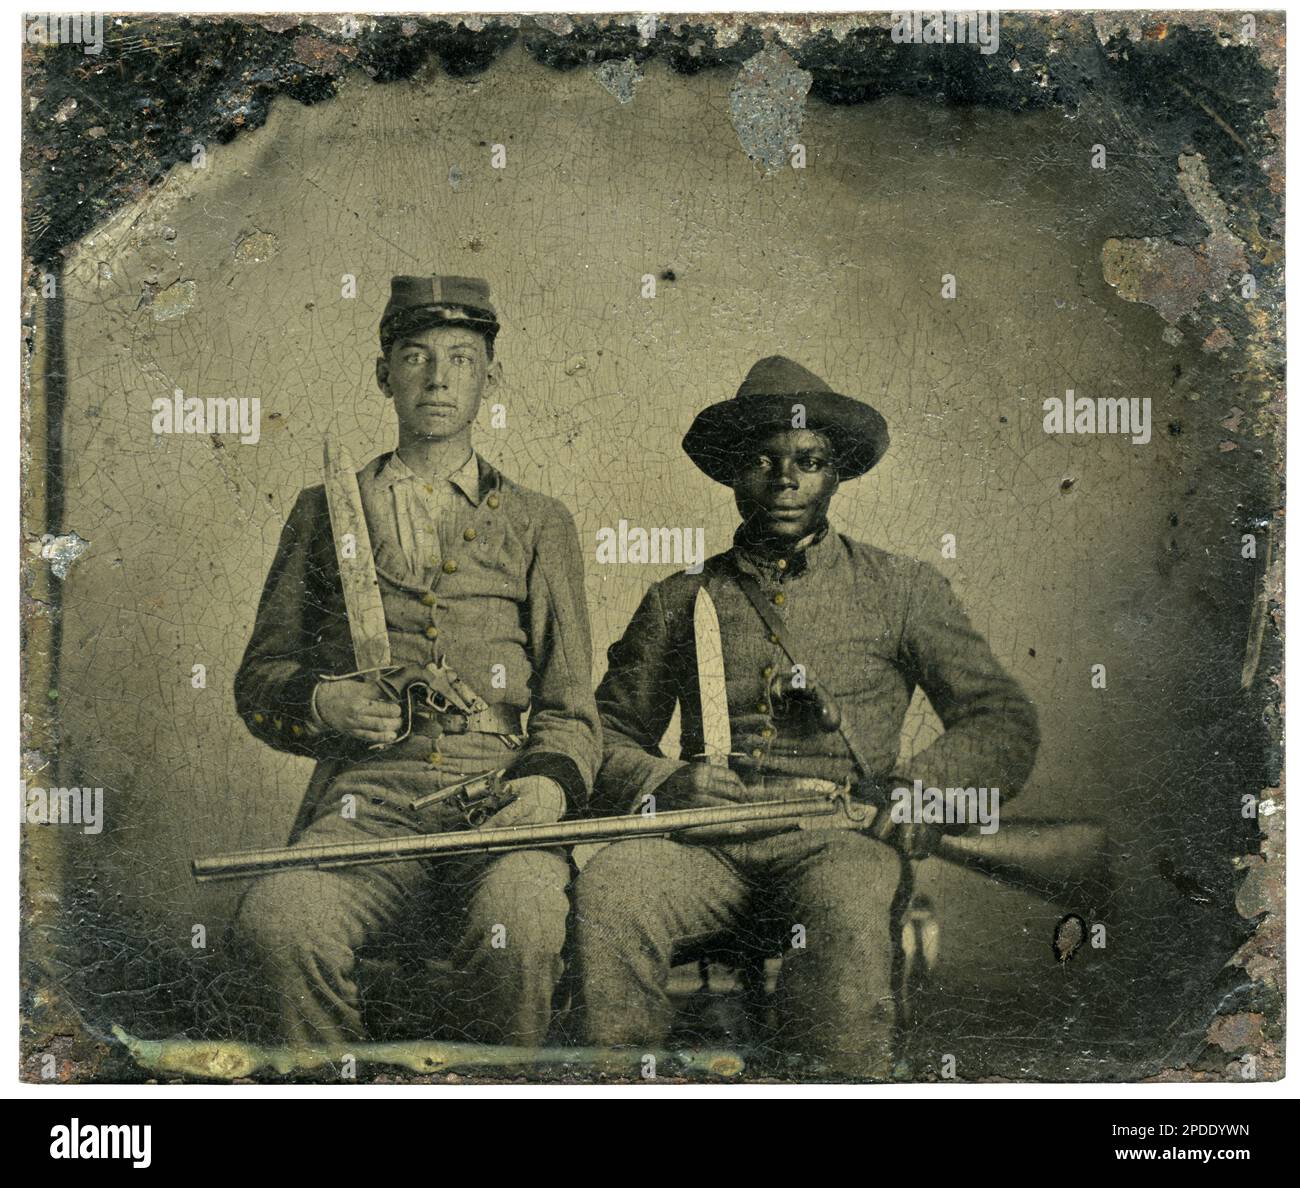 Sergeant A.M. Chandler of Co. F, 44th Mississippi Infantry Regiment, and Silas Chandler, family slave, with Bowie knives, revolvers, pepper-box, shotgun, and canteen. Liljenquist Family Collection of Civil War Photographs , FAmbrotype/Tintype photograph filing series , pp/liljconfed. Chandler, A. M, (Andrew Martin), 1844-1920, Chandler, Silas, 1837-1919, Confederate States of America, Army, Mississippi Infantry Regiment, 44th, People, 1860-1870, African Americans, 1860-1870, Slaves, 1860-1870, Soldiers, Confederate, 1860-1870, Military uniforms, Confederate, 1860-1870. Stock Photo